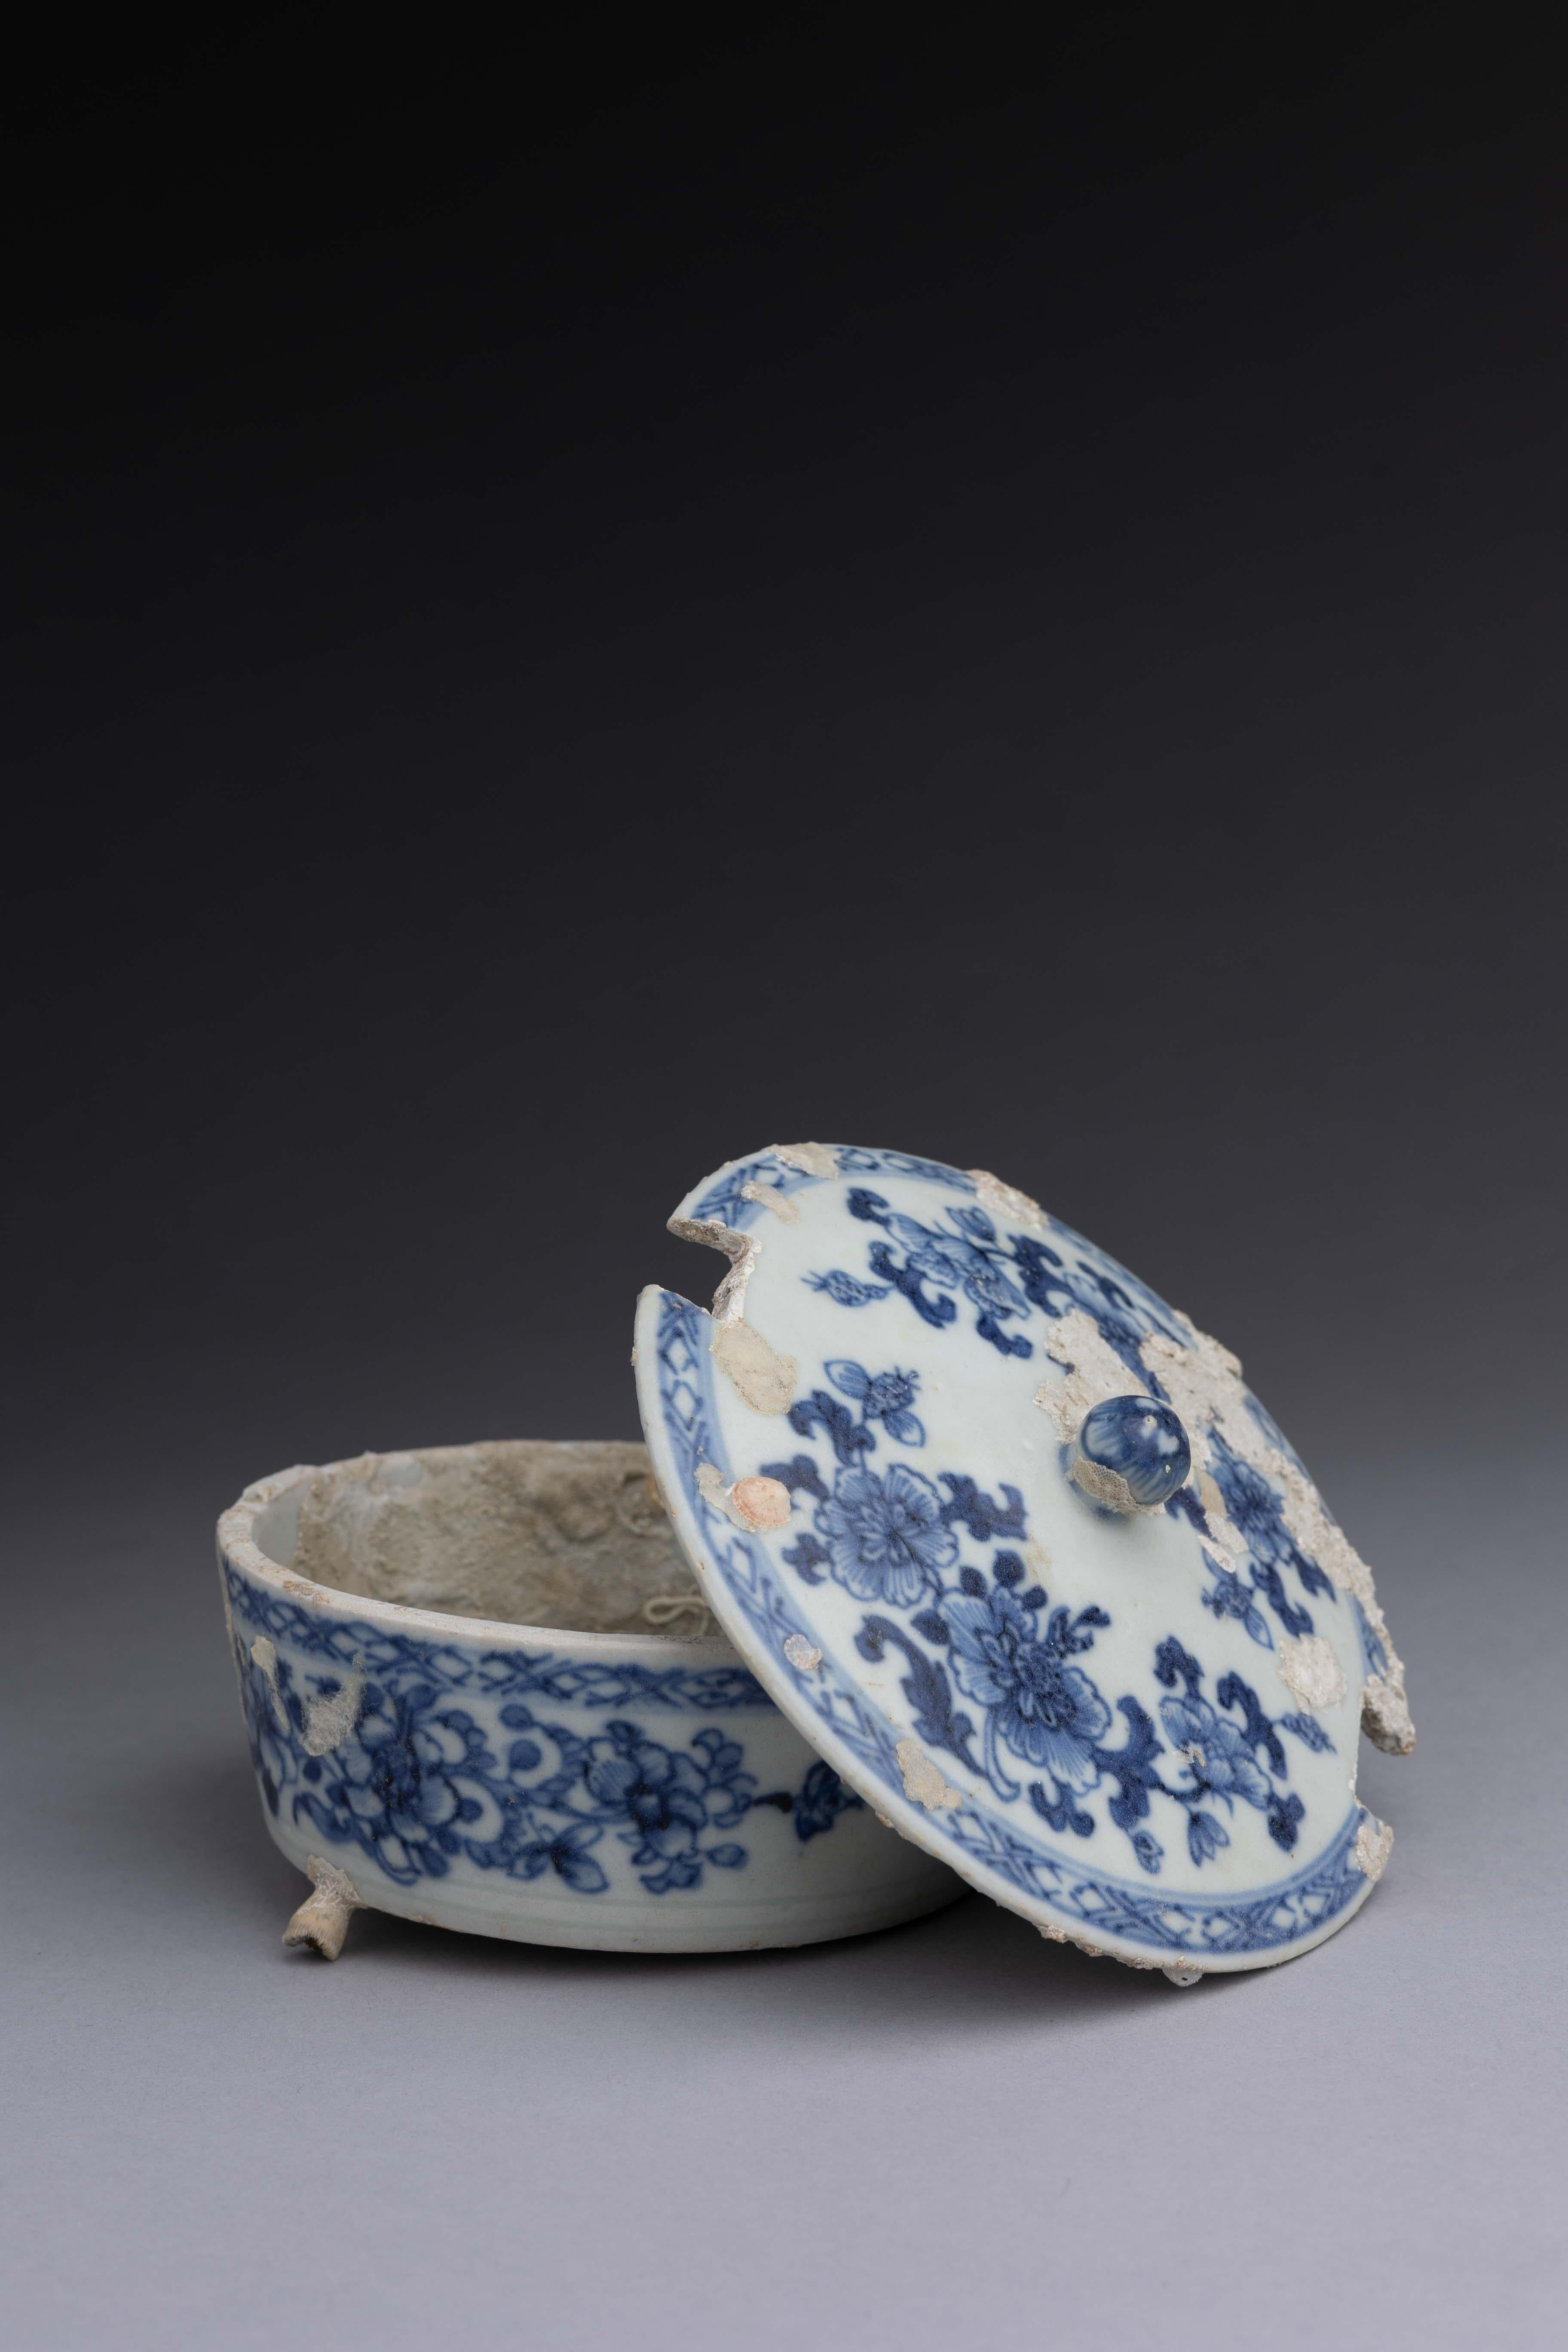 A Chinese export butter tub, made in the mid 18th century, salvaged from the Hatcher Porcelain Cargoes.

Salvaged from the bottom of the South China Sea by Captain Michael Hatcher, this Chinese export porcelain butter tub is a testament to the